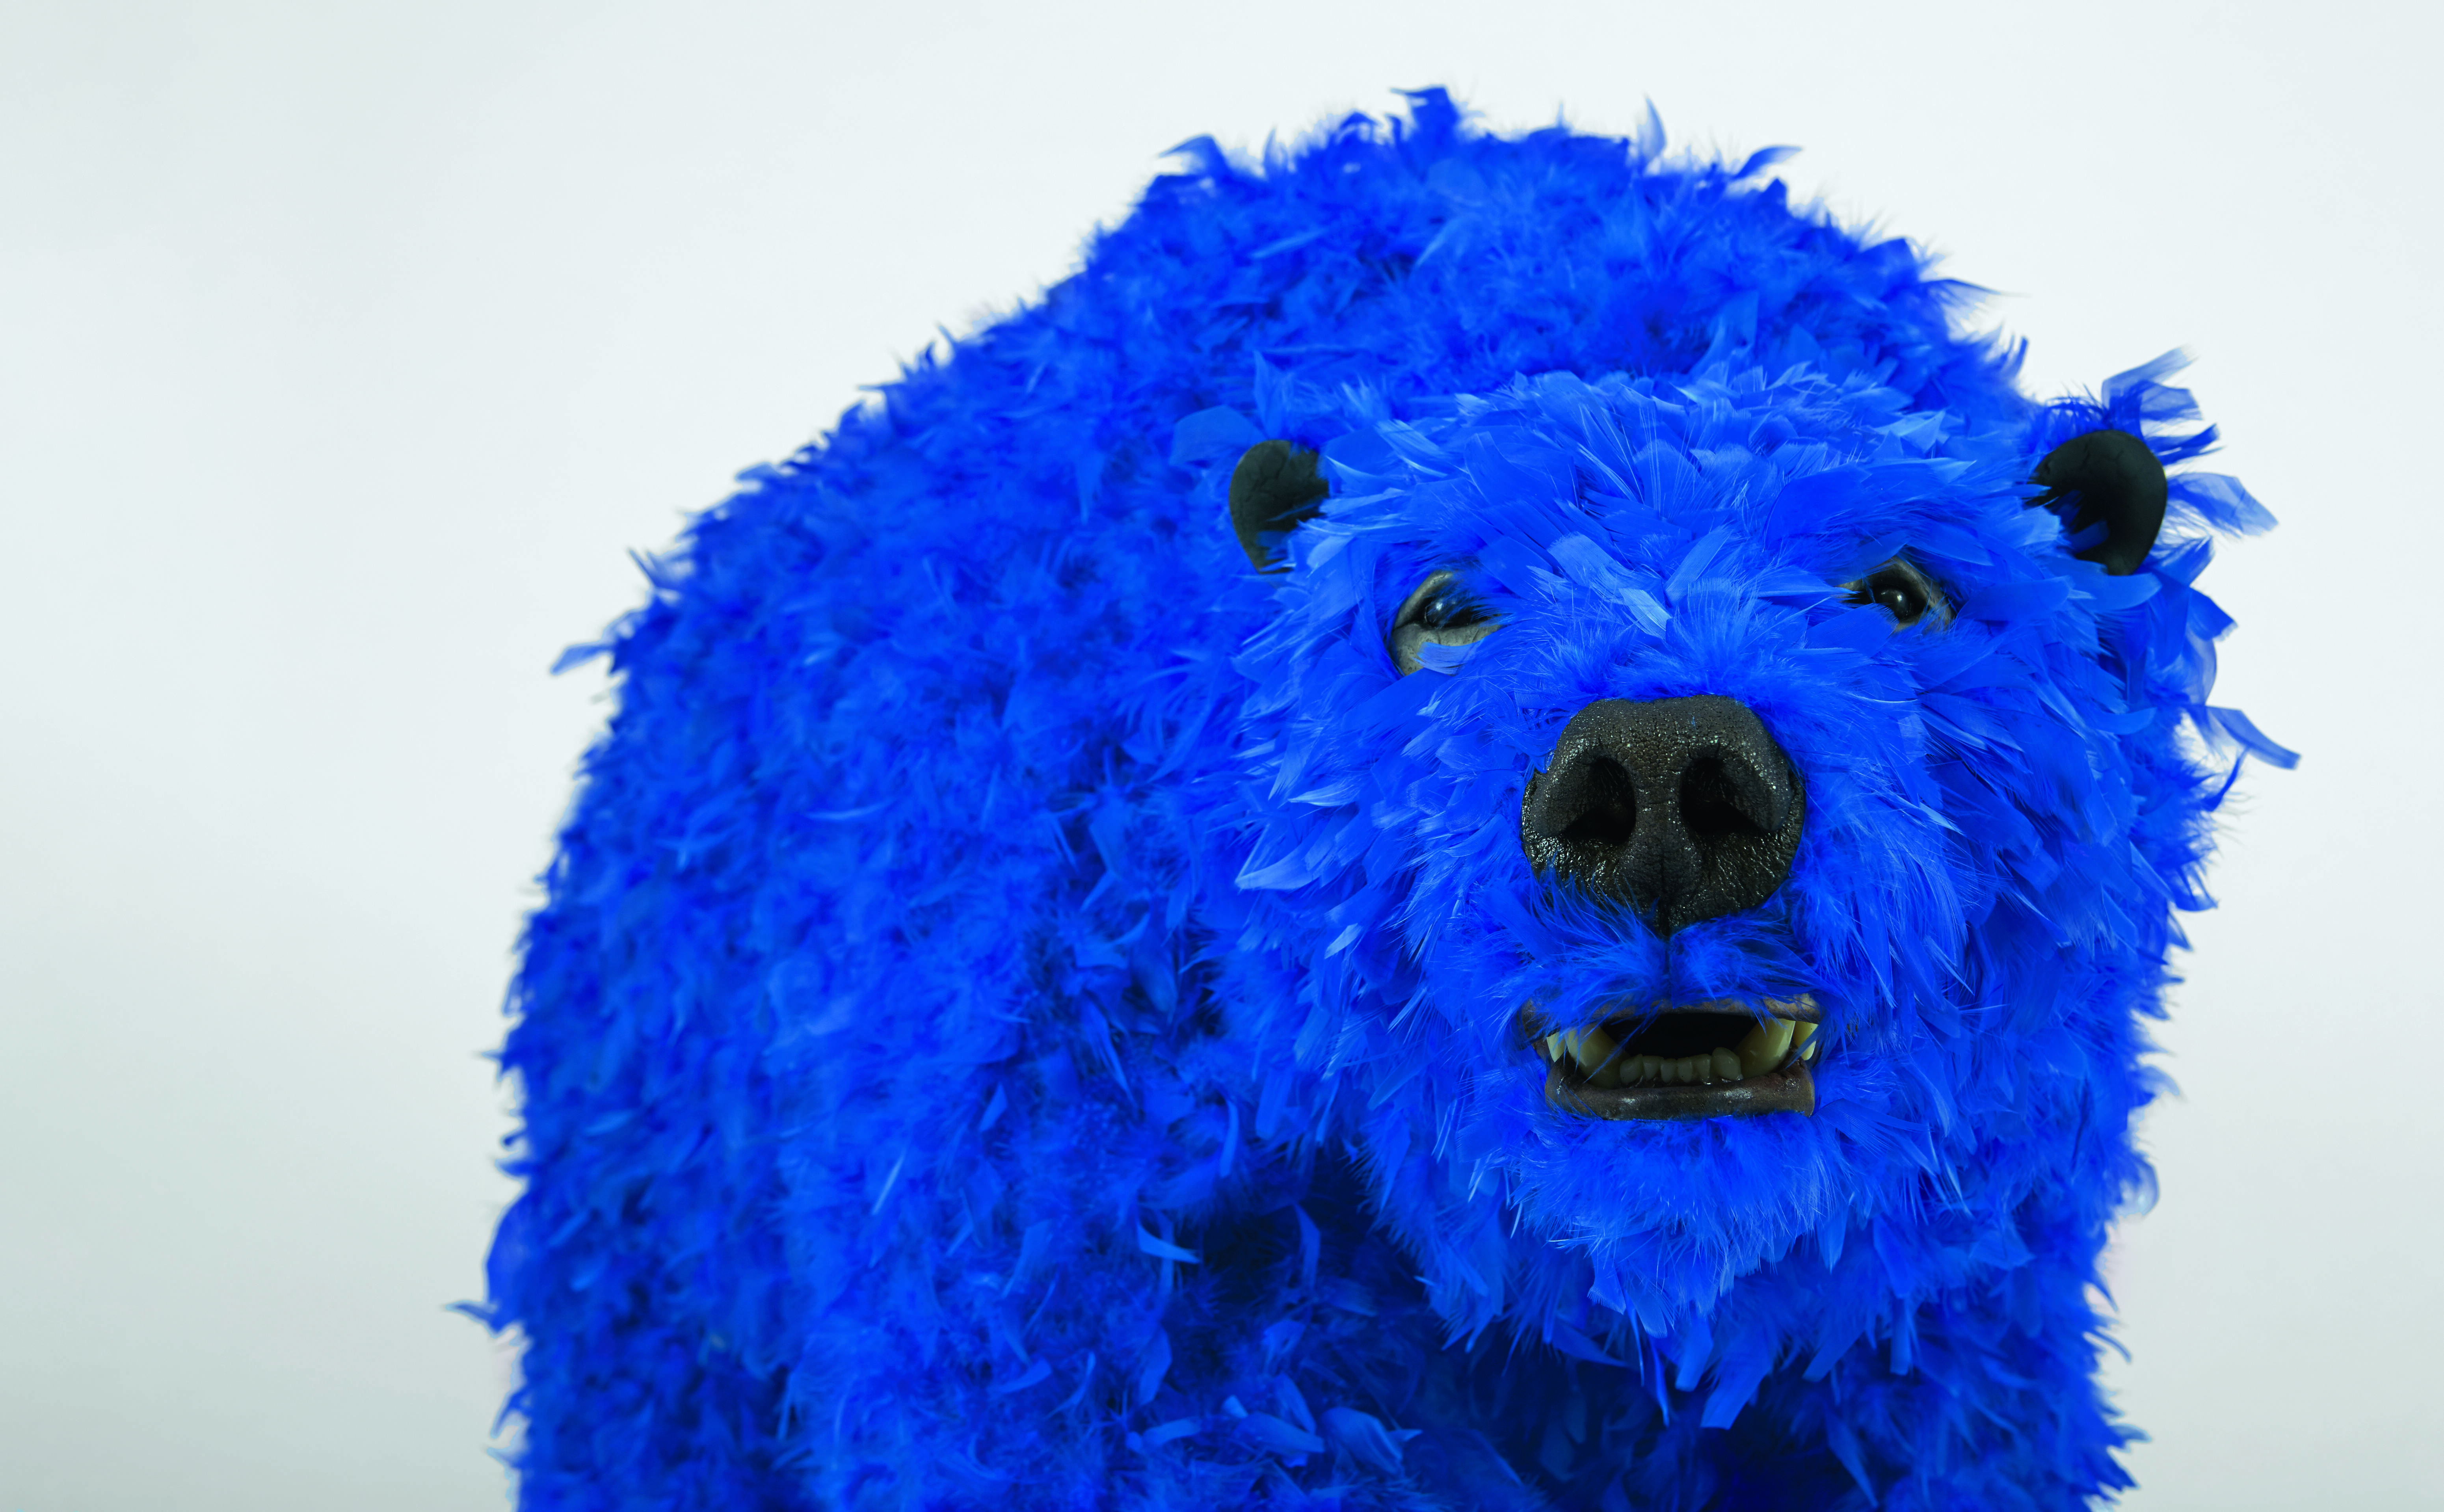 The dark truth about Paola Pivi’s brightly coloured bears